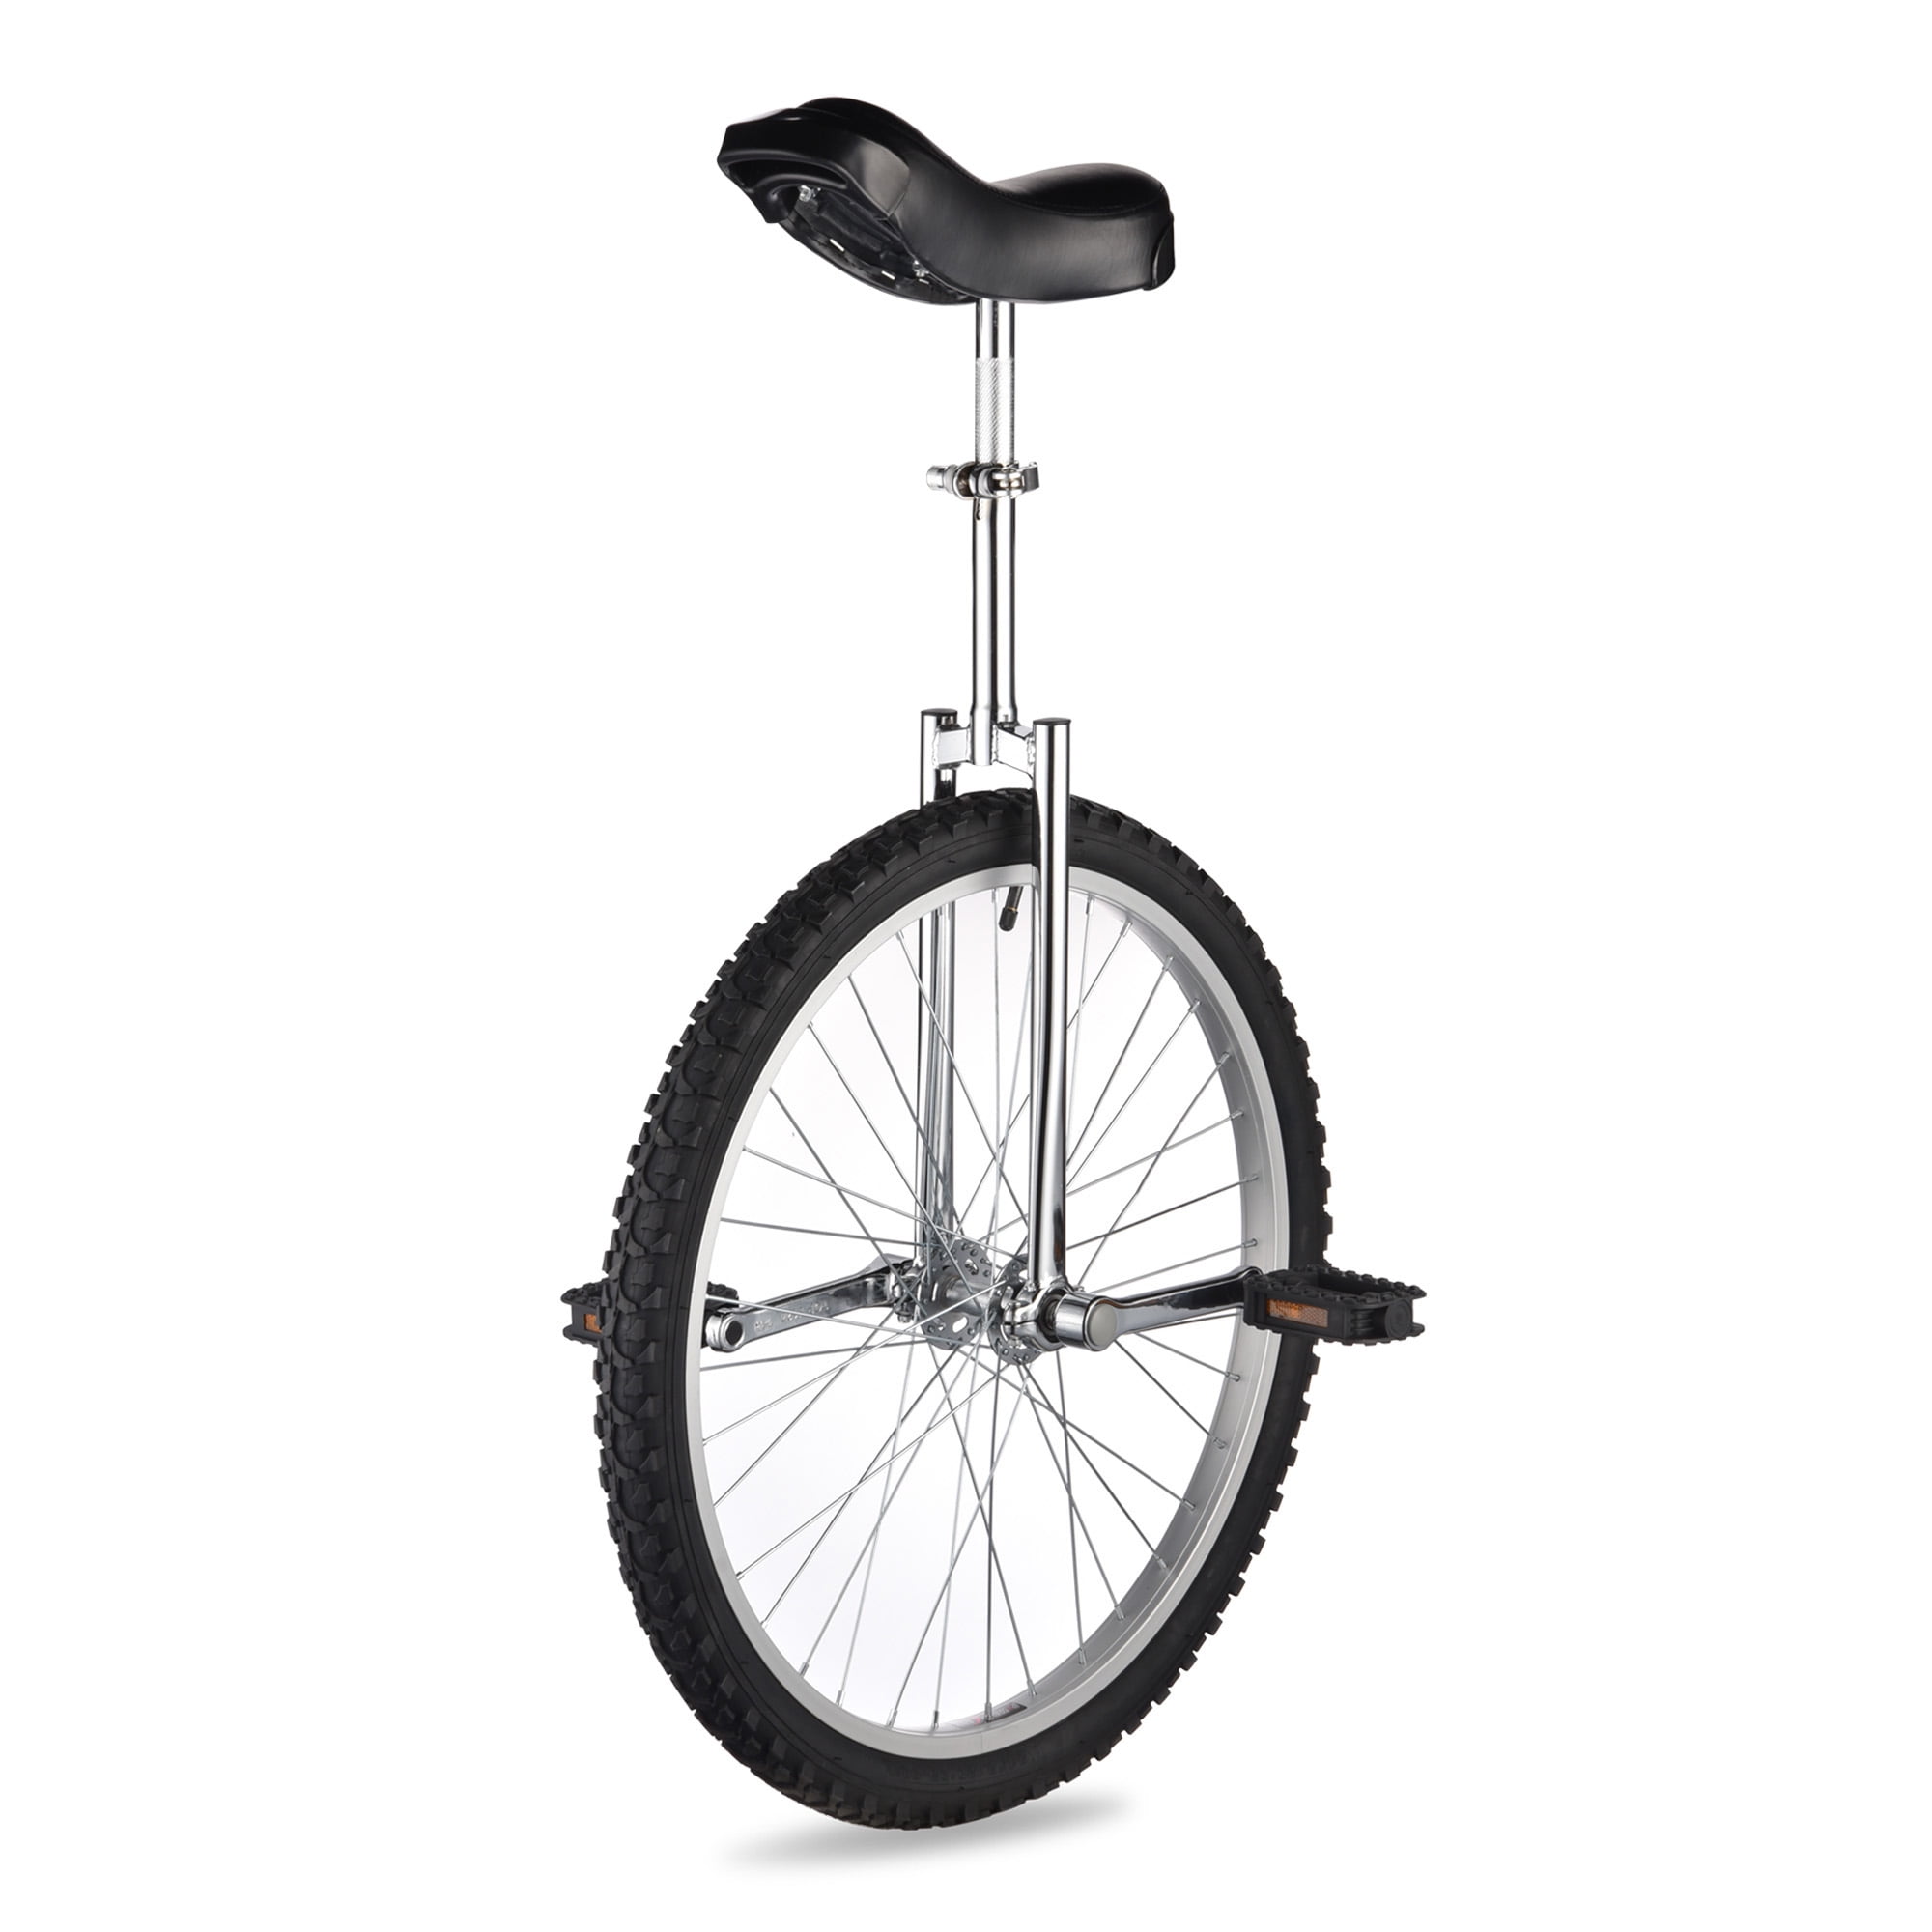 Cyclists' Choice By-904A 24" Alloy Wheel Unicycle Black 